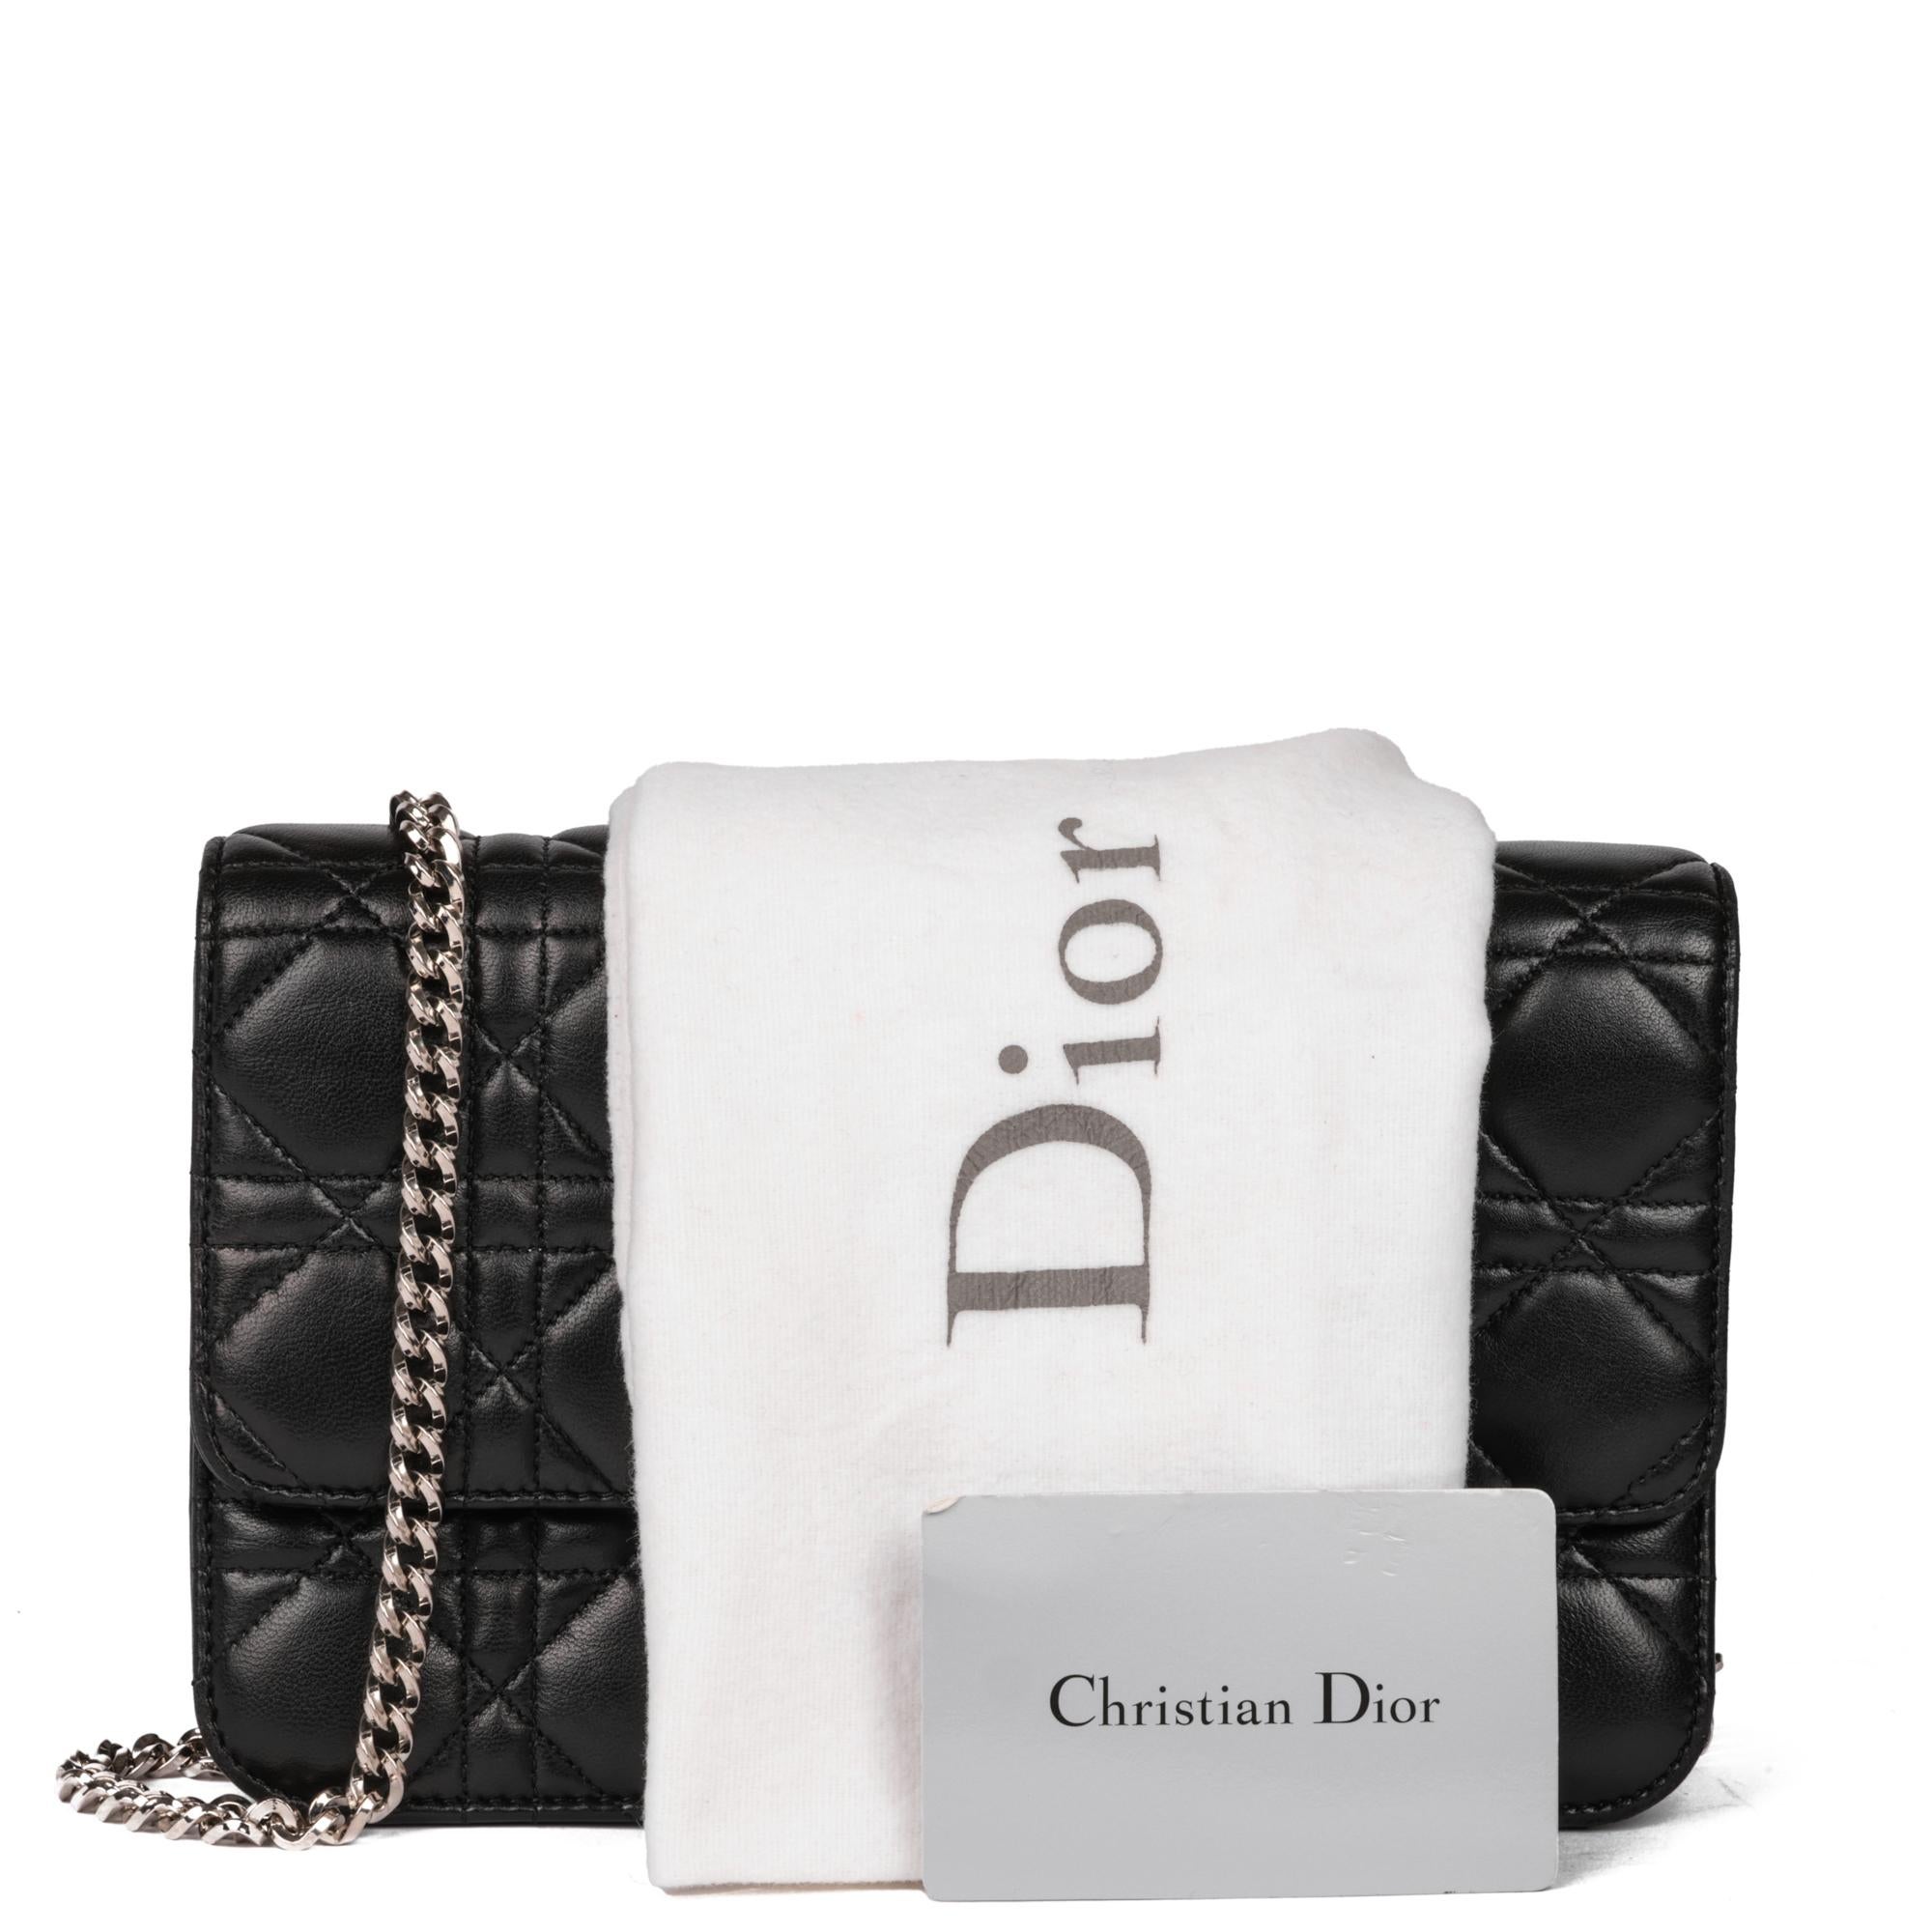 CHRISTIAN DIOR Black Quilted Lambskin Miss Dior Flap Bag 5